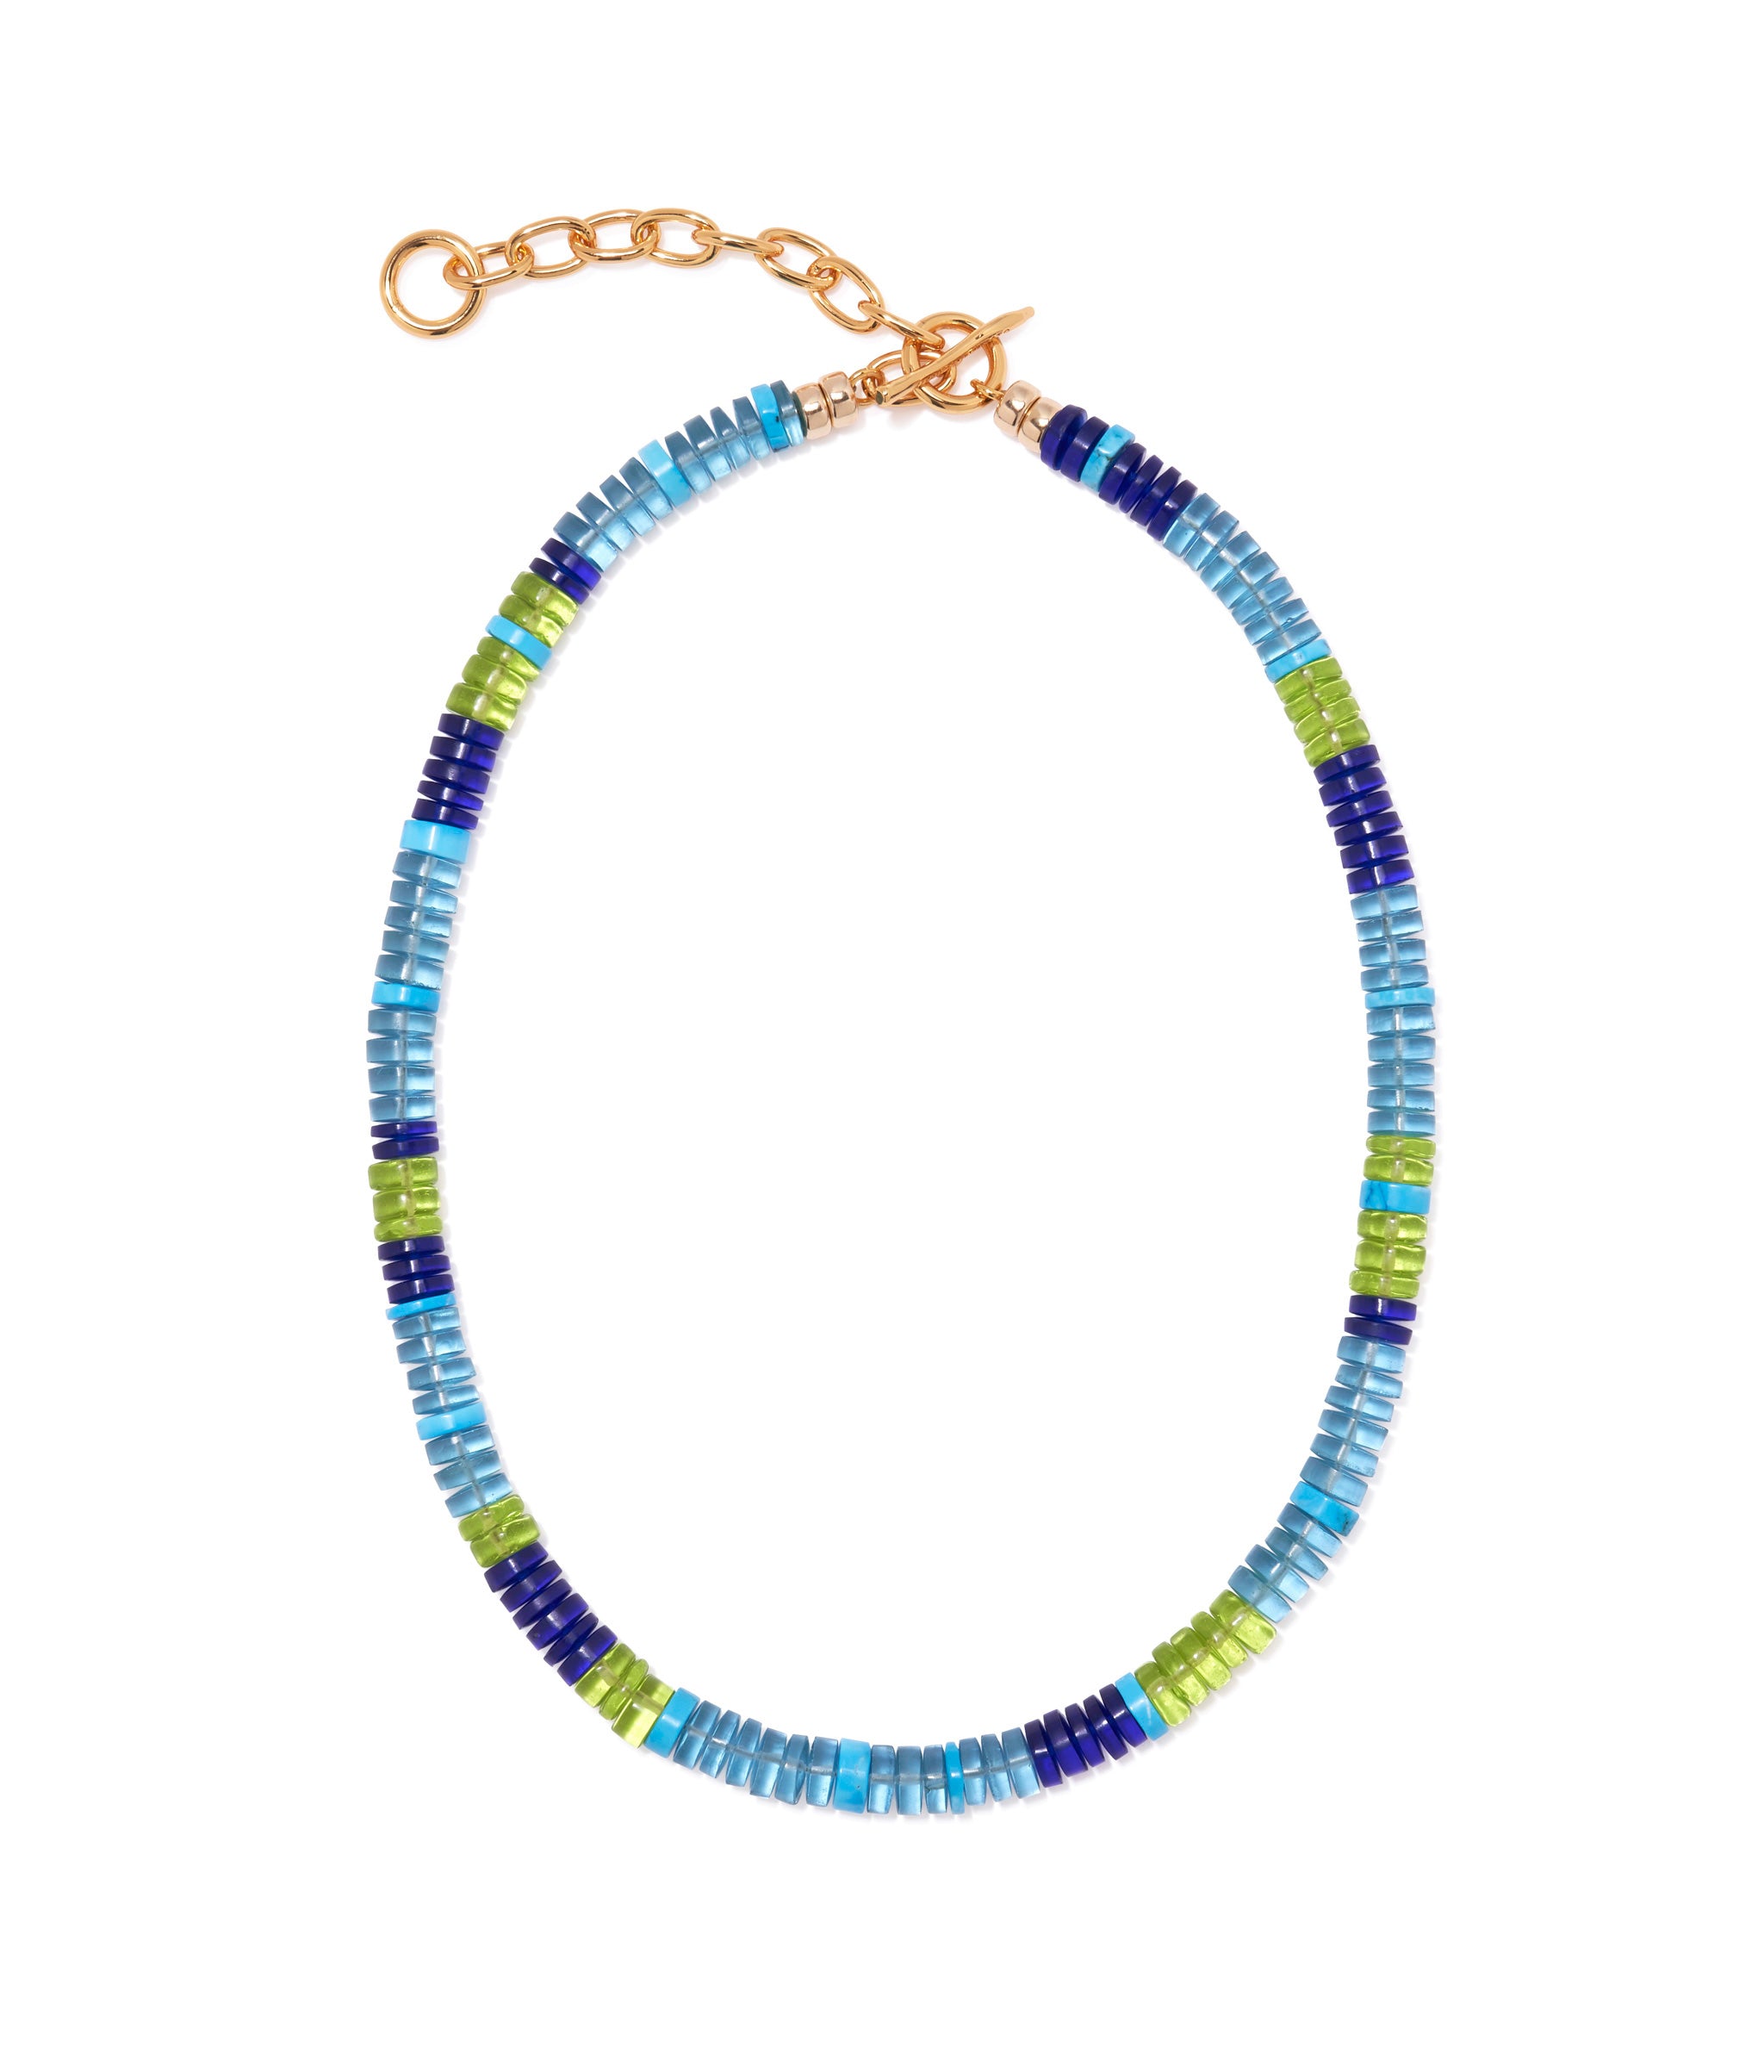 Agosto Necklace in High Tide. Striped blue-green glass and howlite beads with a gold-plated brass toggle closure.